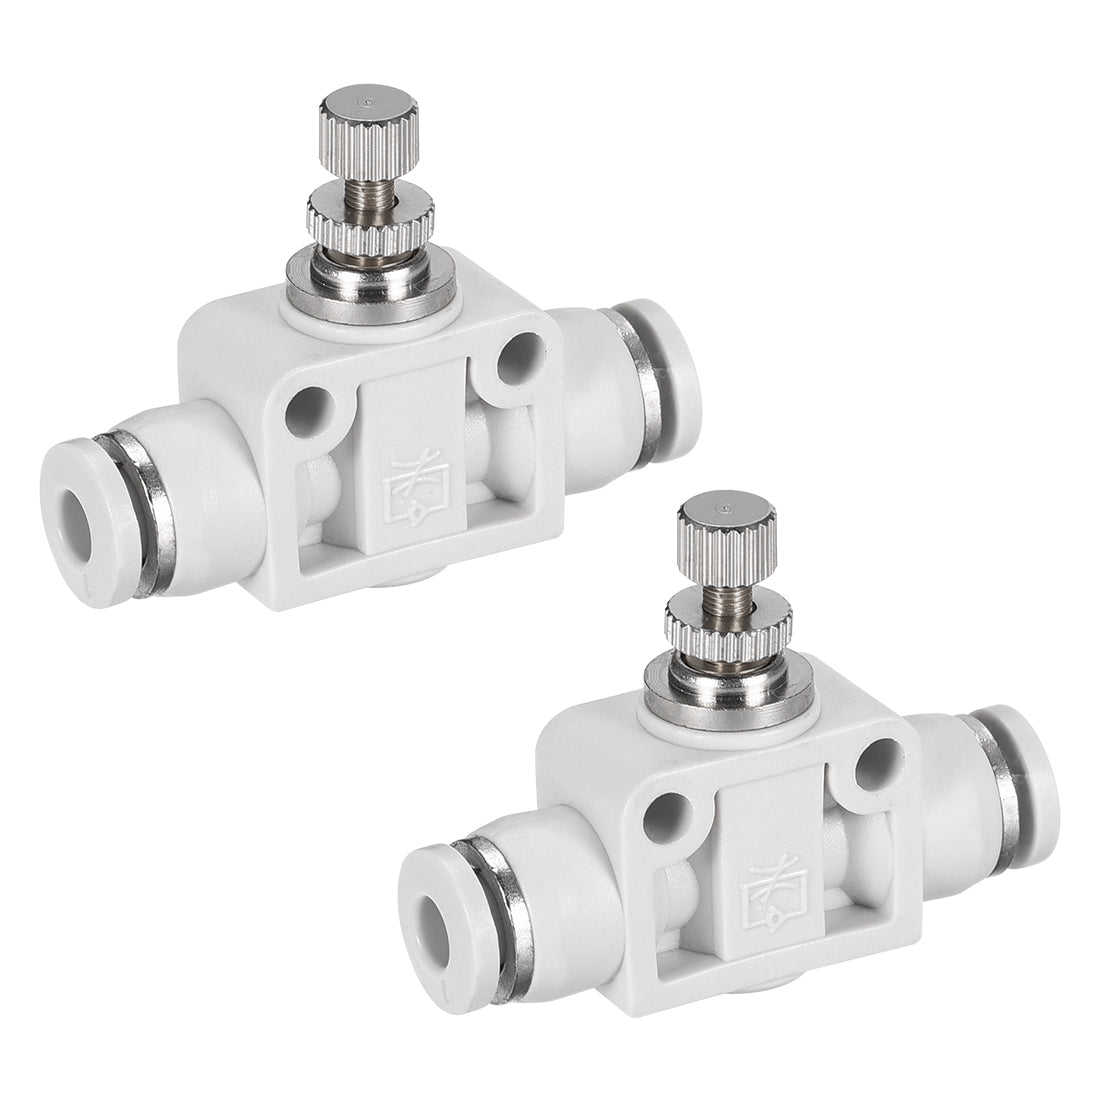 Uxcell Uxcell Air Flow Control Valve, In-line Speed Controller Union Straight, 12mm Tube Outer Diameter 2Pcs